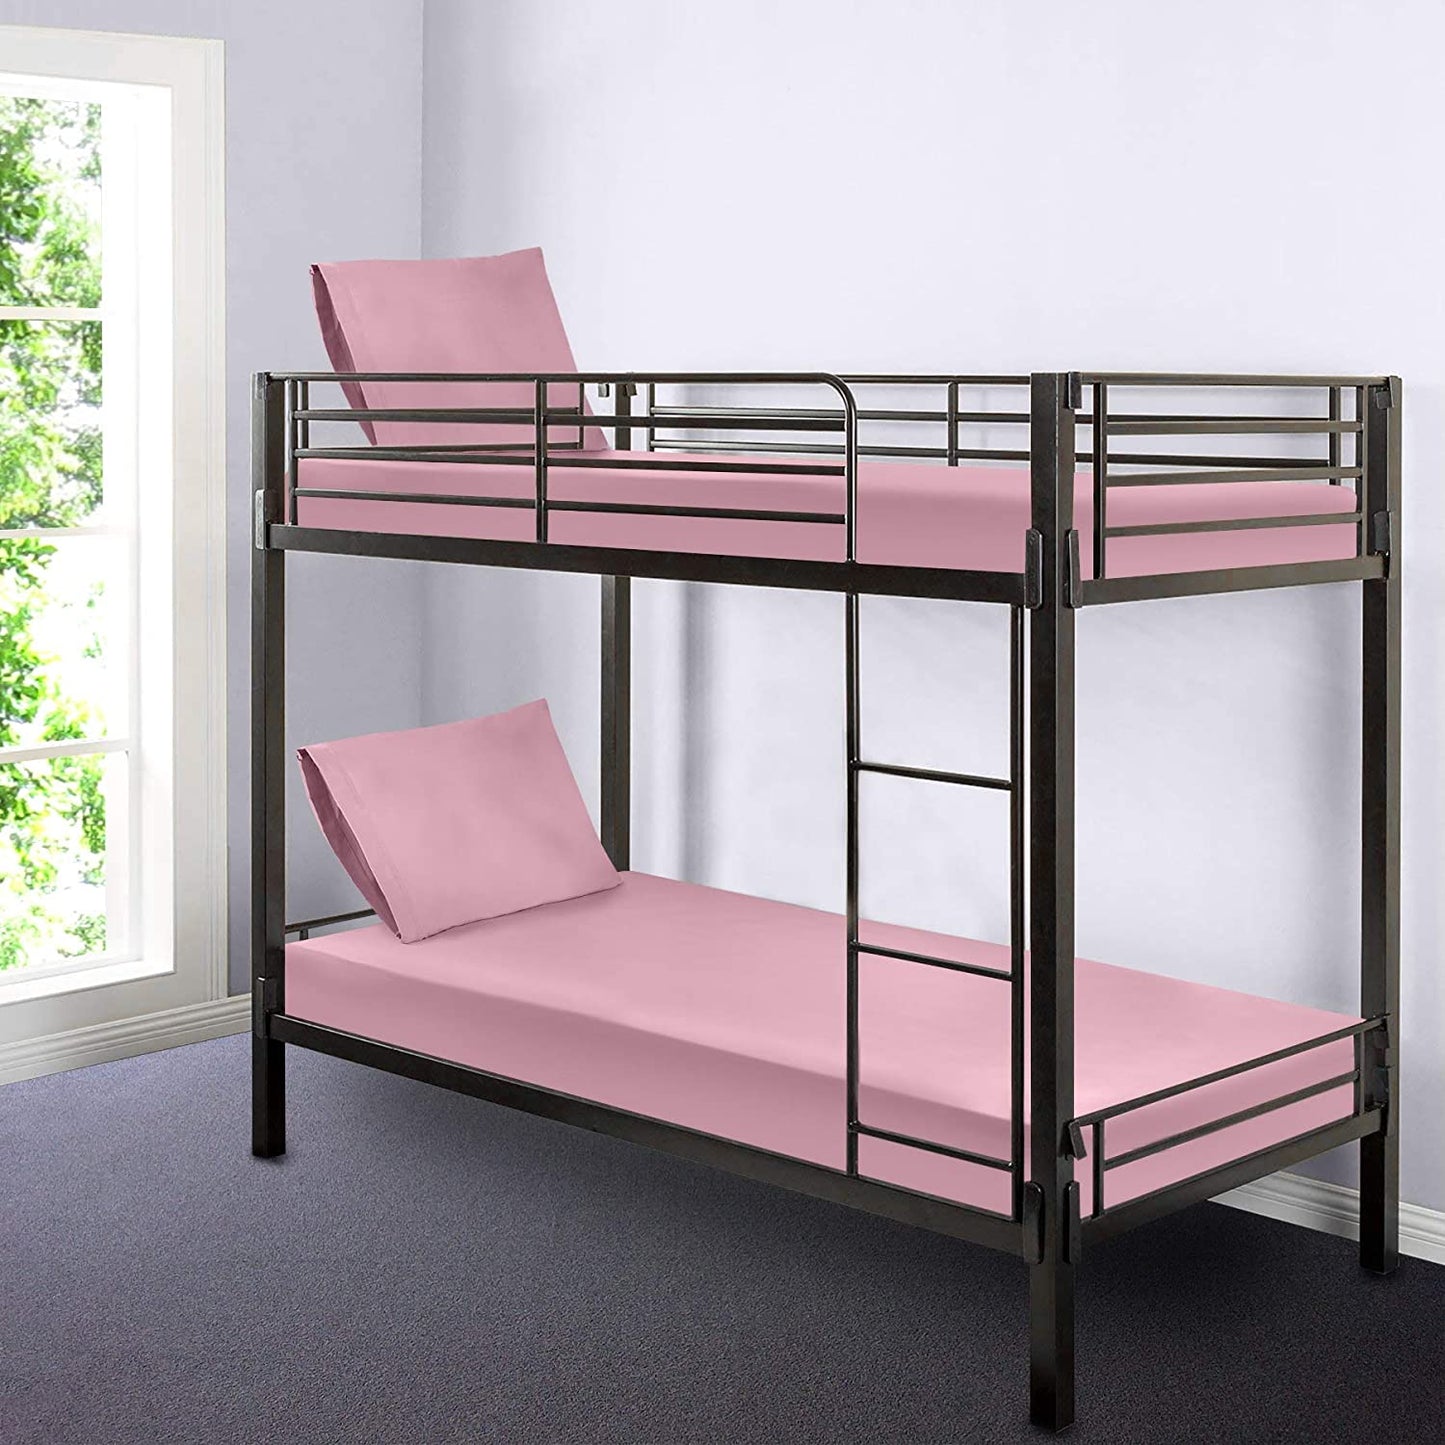 Gilbins 30" x 75" Cot Size 2-Piece Bed Sheet Set, Made of Ultra Soft Cotton, Perfect for Camp Bunk Beds/RVs/Guest Beds (Pink)